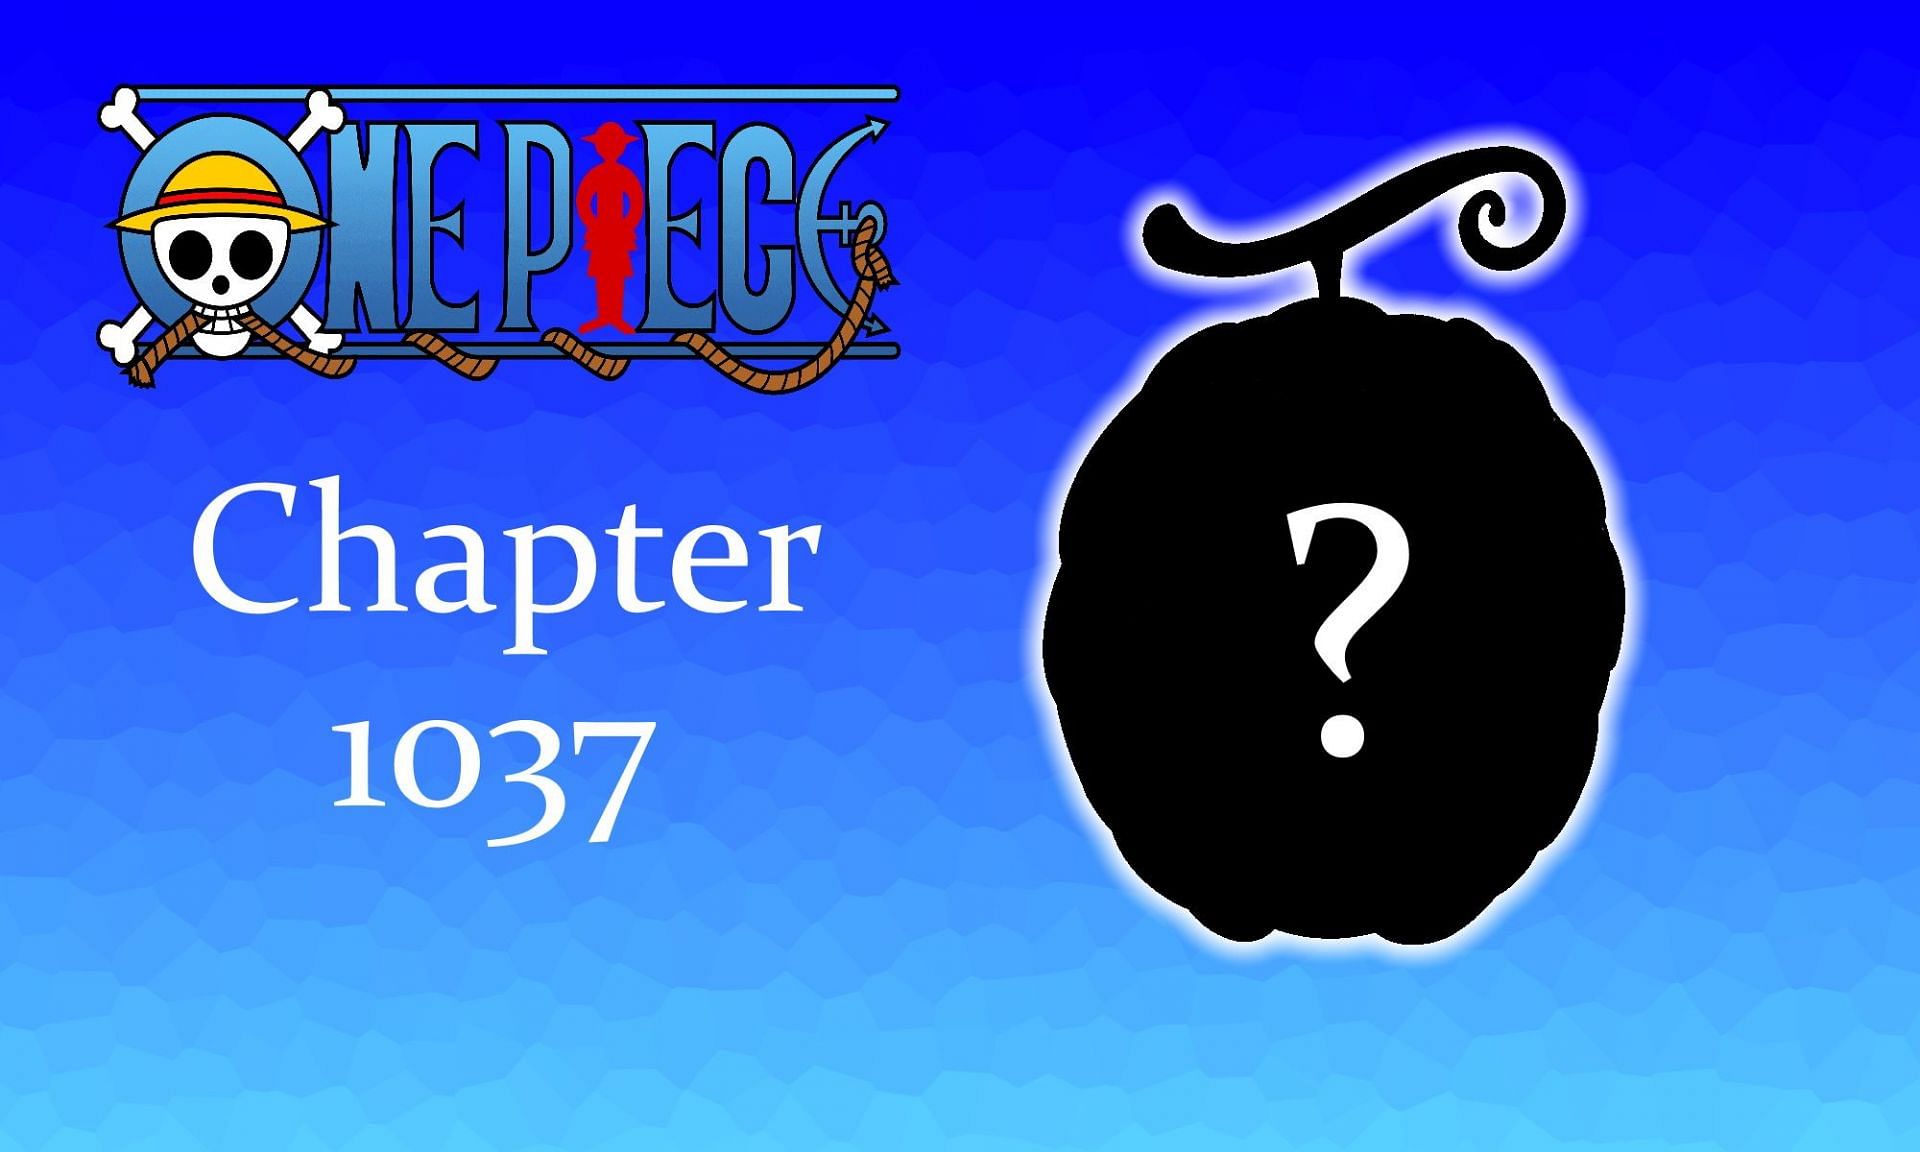 One Piece Chapter 1037 leaves more questions than answers (Image via Sportskeeda)